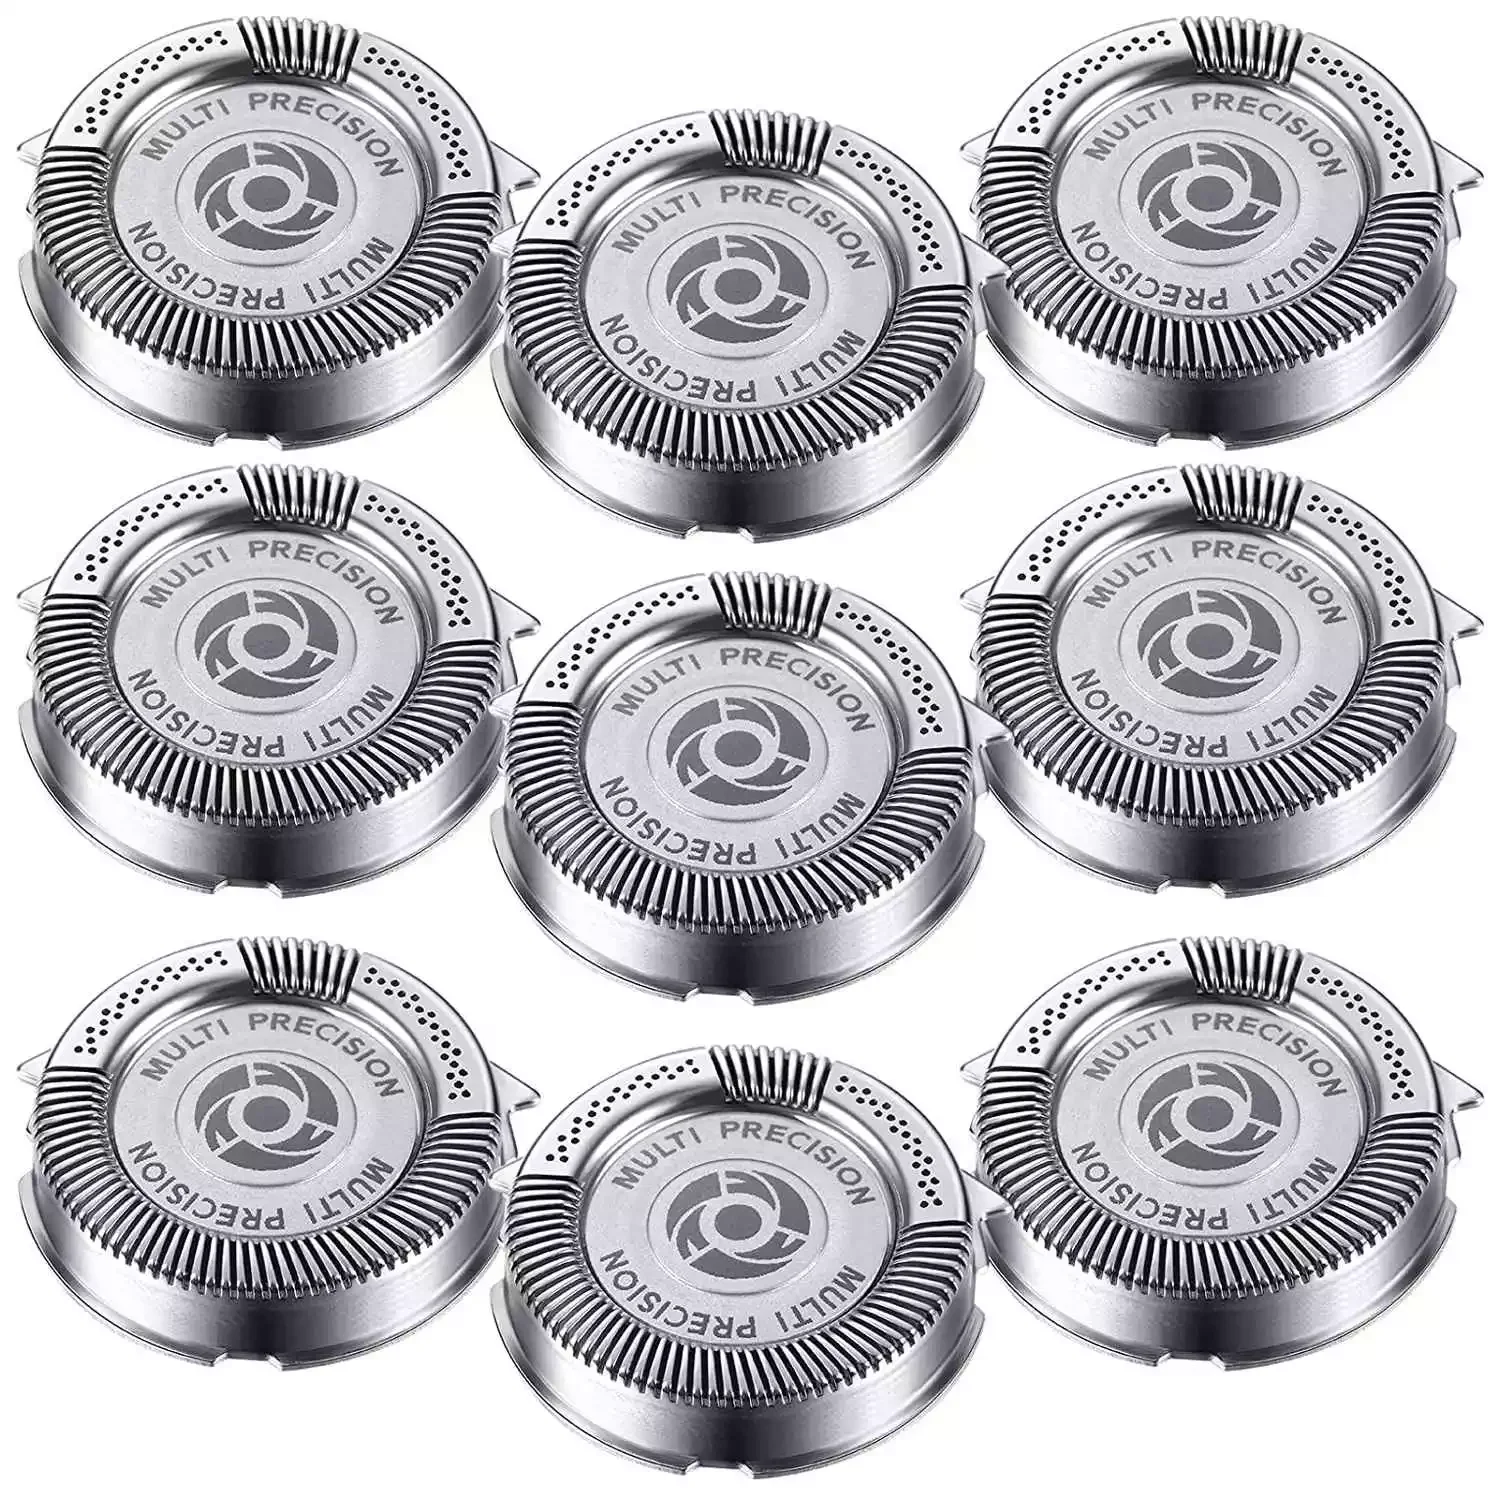 New in Replacement Heads for Philips Norelco Shavers Series 5000, AquaTouch, PowerTouch, 9 Pack Blades free shipping beauty heal